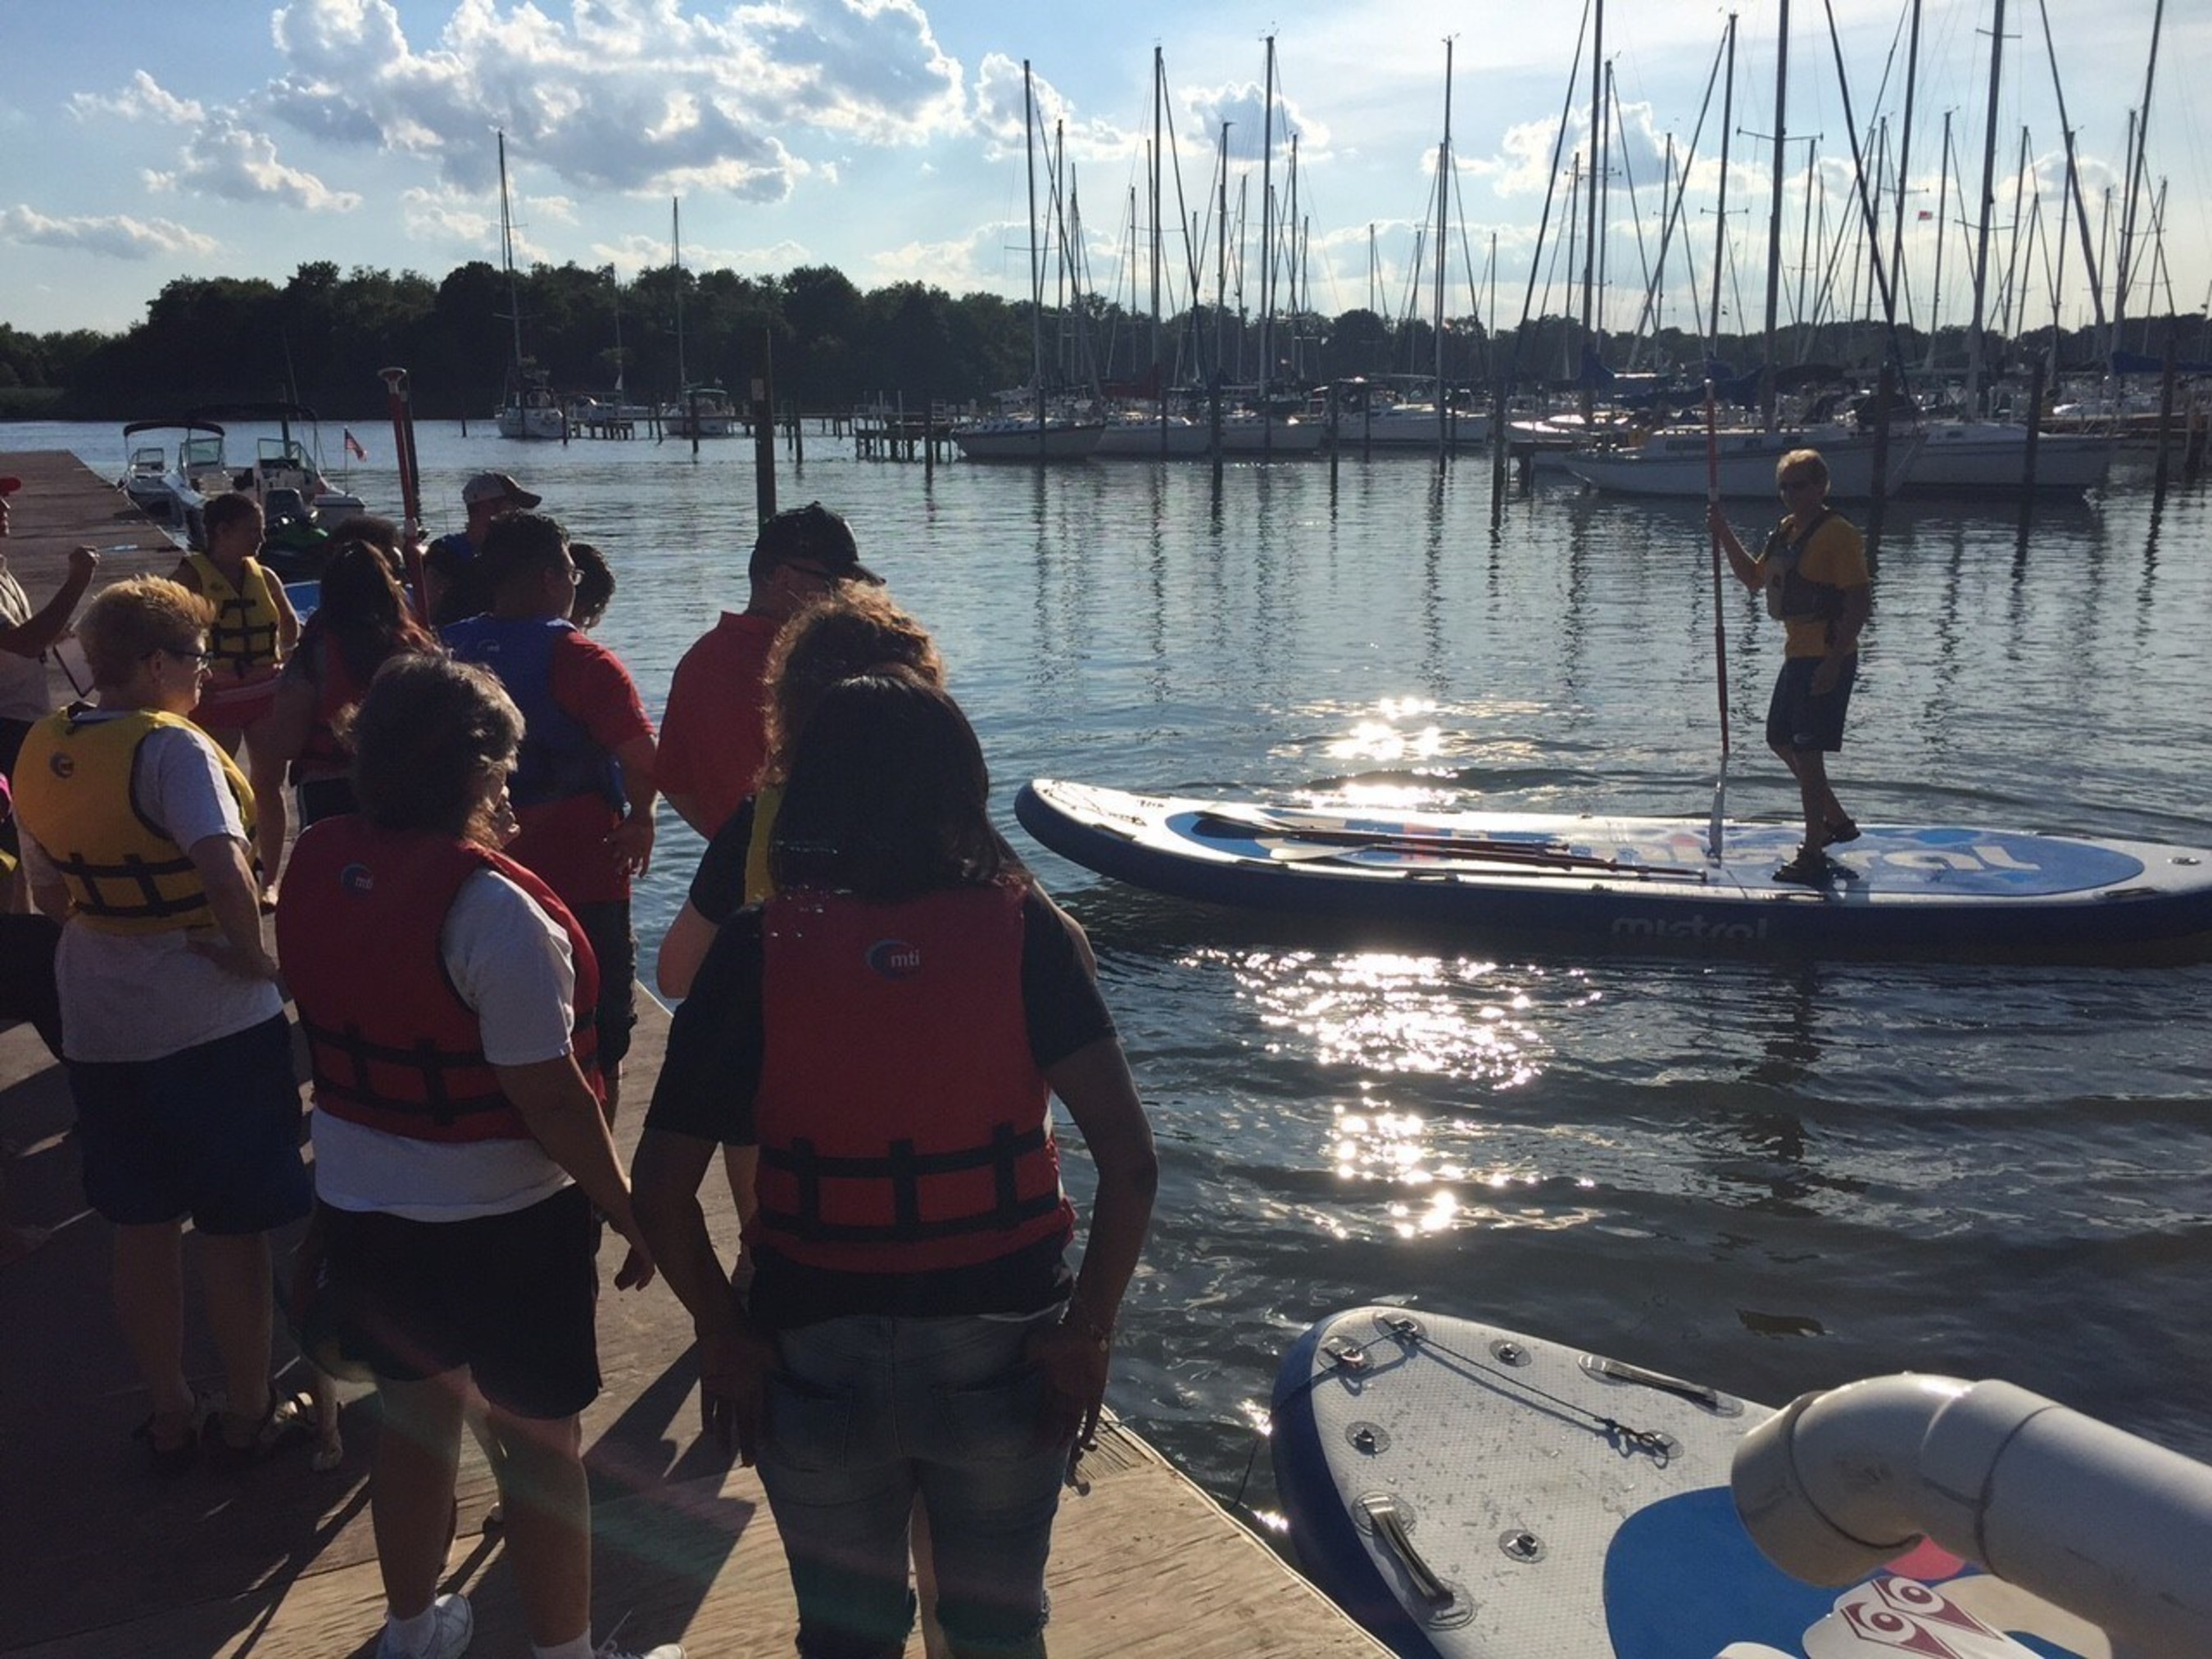 Wounded veterans recently participated in a monster stand-up paddleboarding competition at a program gathering with Wounded Warrior Project in Middle River, Maryland.